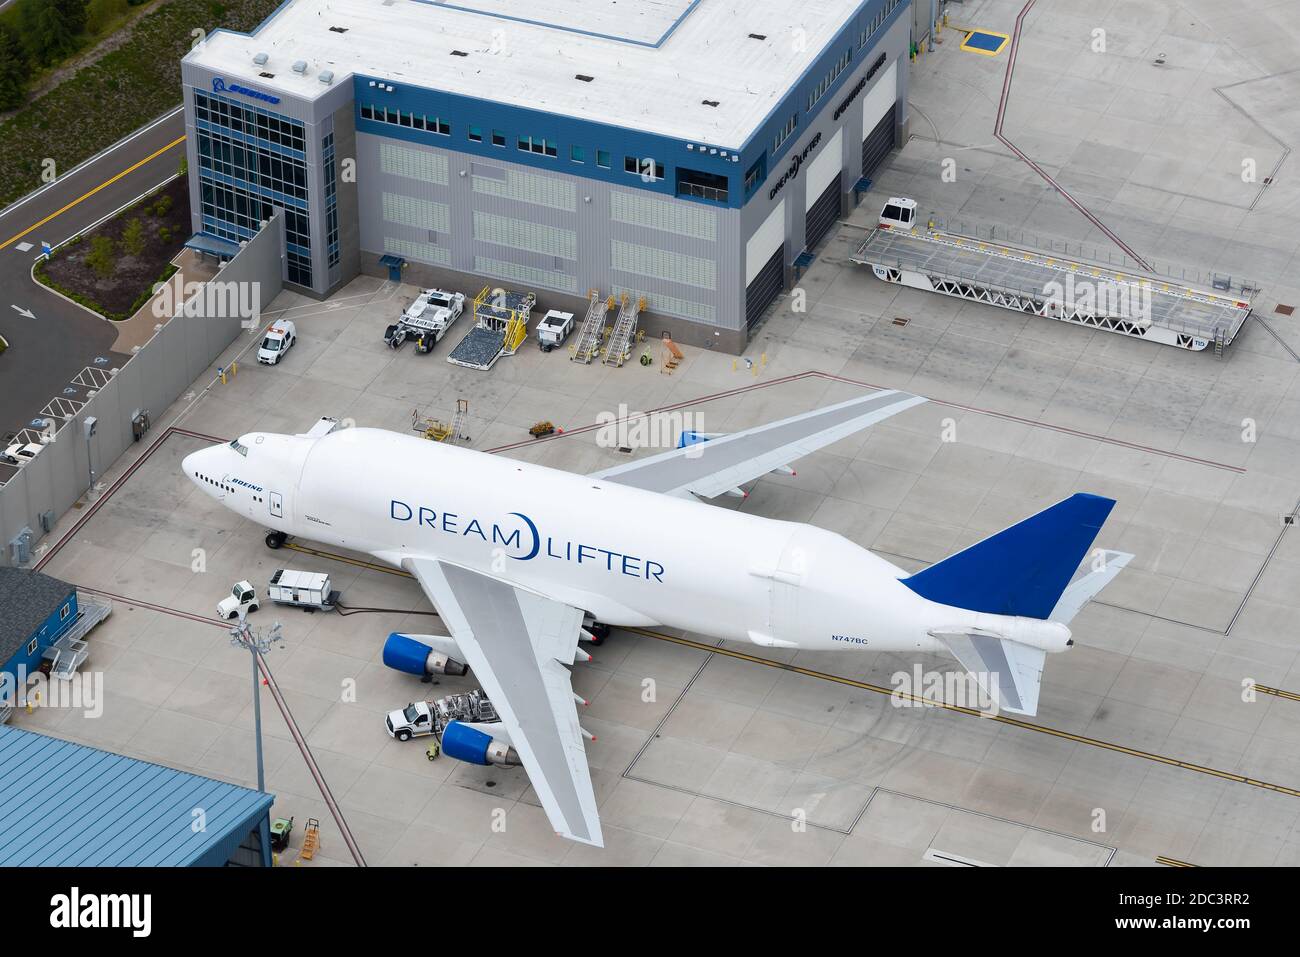 Boeing 747 LCF Dreamlifter airplane Operation Center aerial view at Paine Field, Everett. Dreamlifter Large Cargo Transportation modified aircraft. Stock Photo